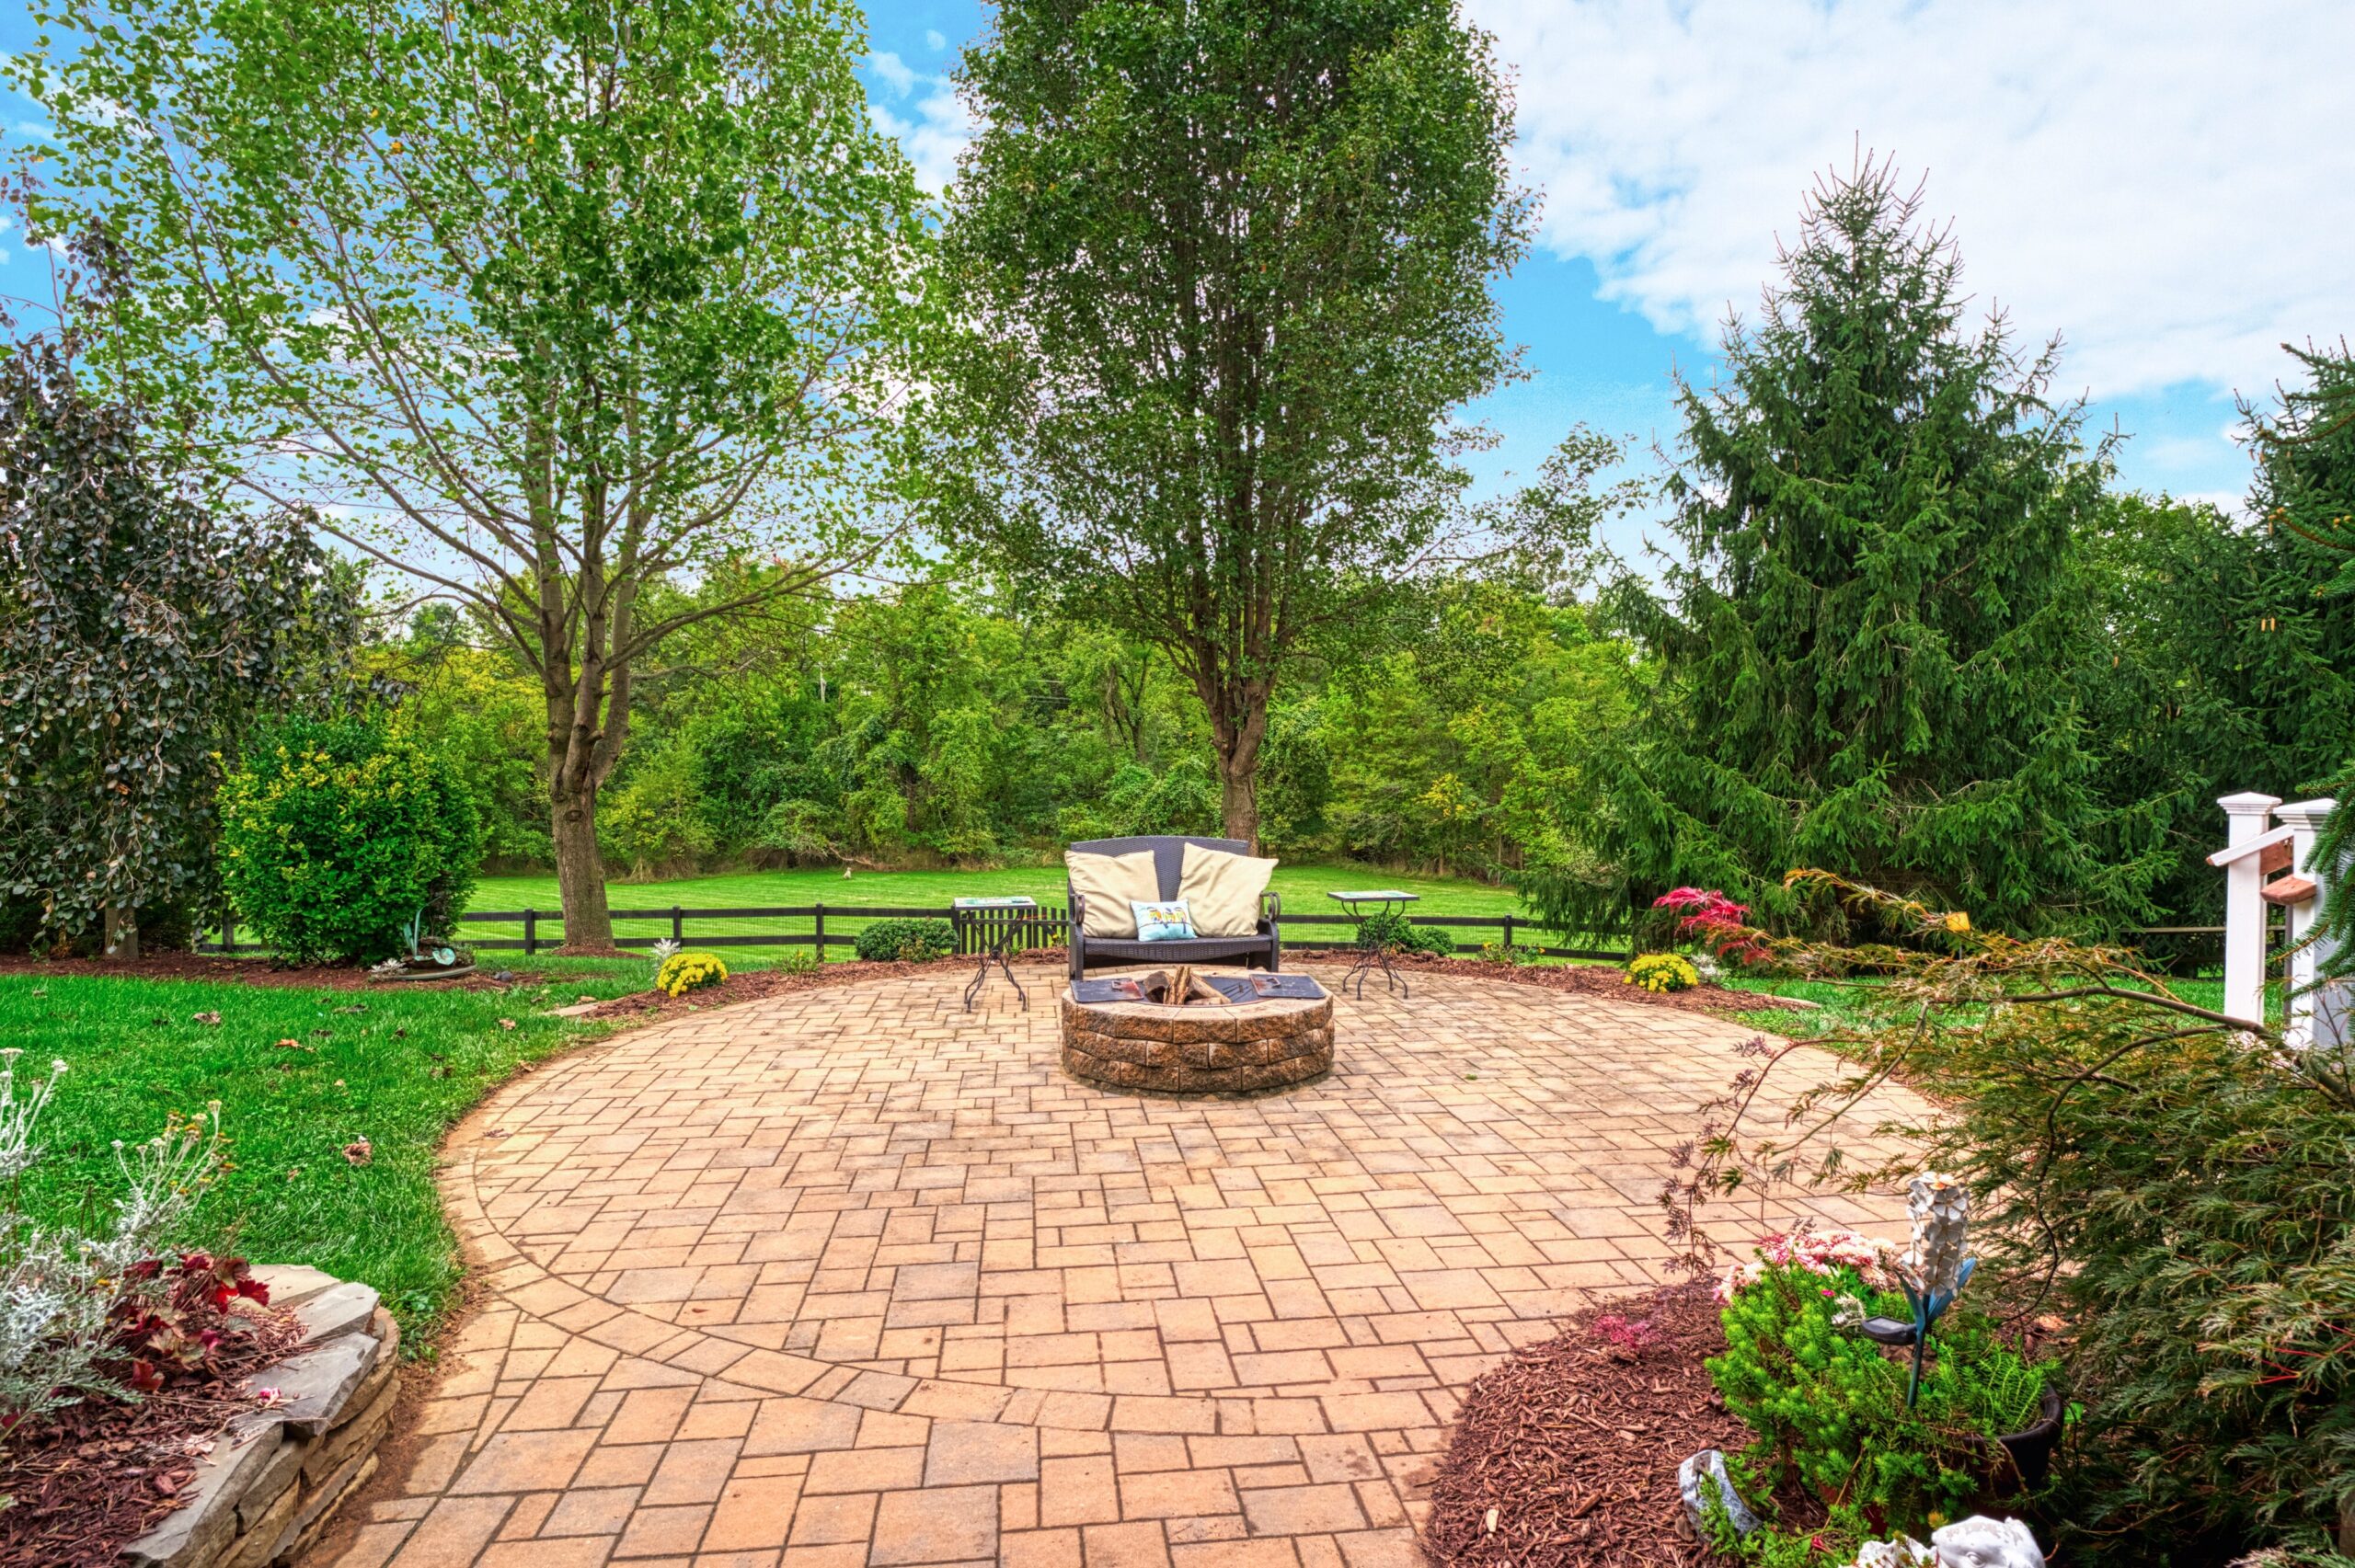 Professional exterior photo of 16961 Heather Knolls Pl - showing the circular stone patio with fire pit inside a fenced backyard